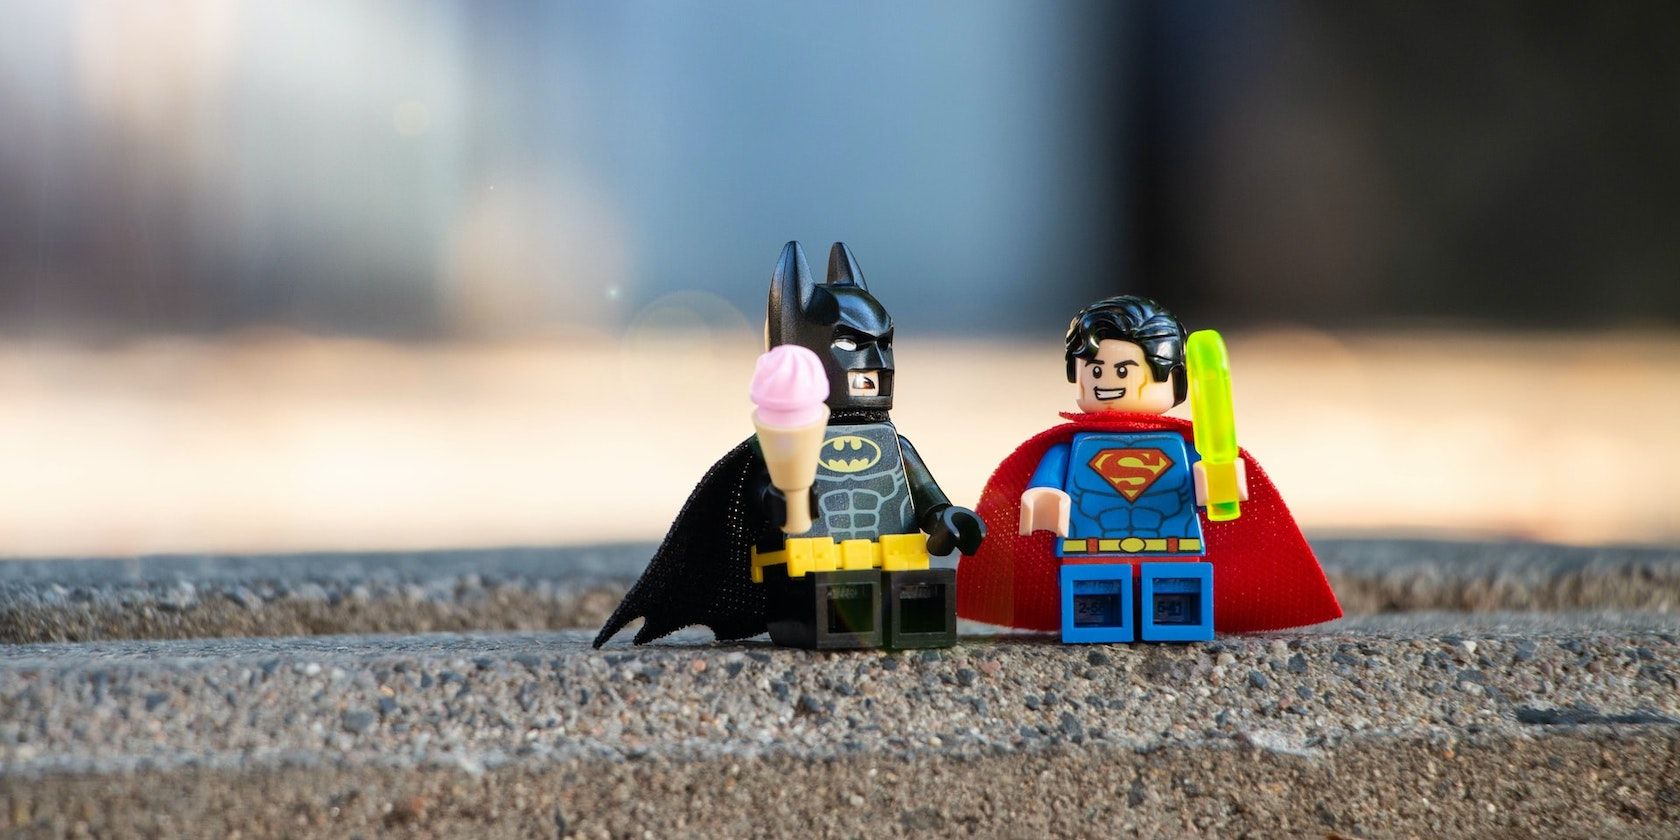 A close-up photo of a Lego Batman and Superman character eating ice cream.